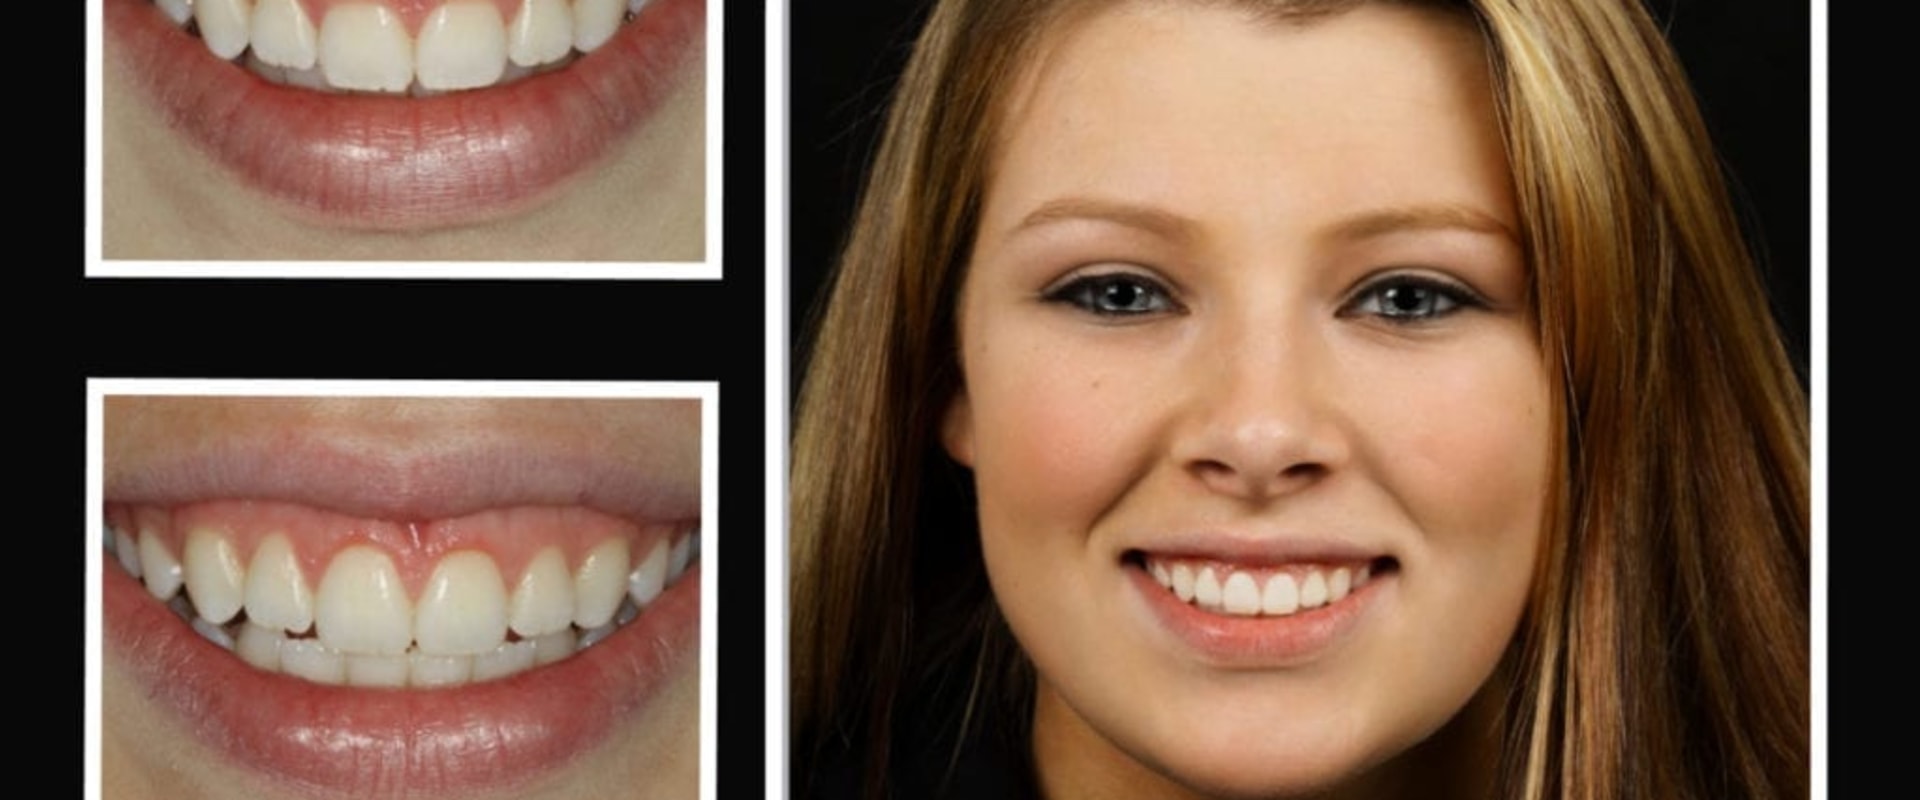 How much does laser dentistry cost?